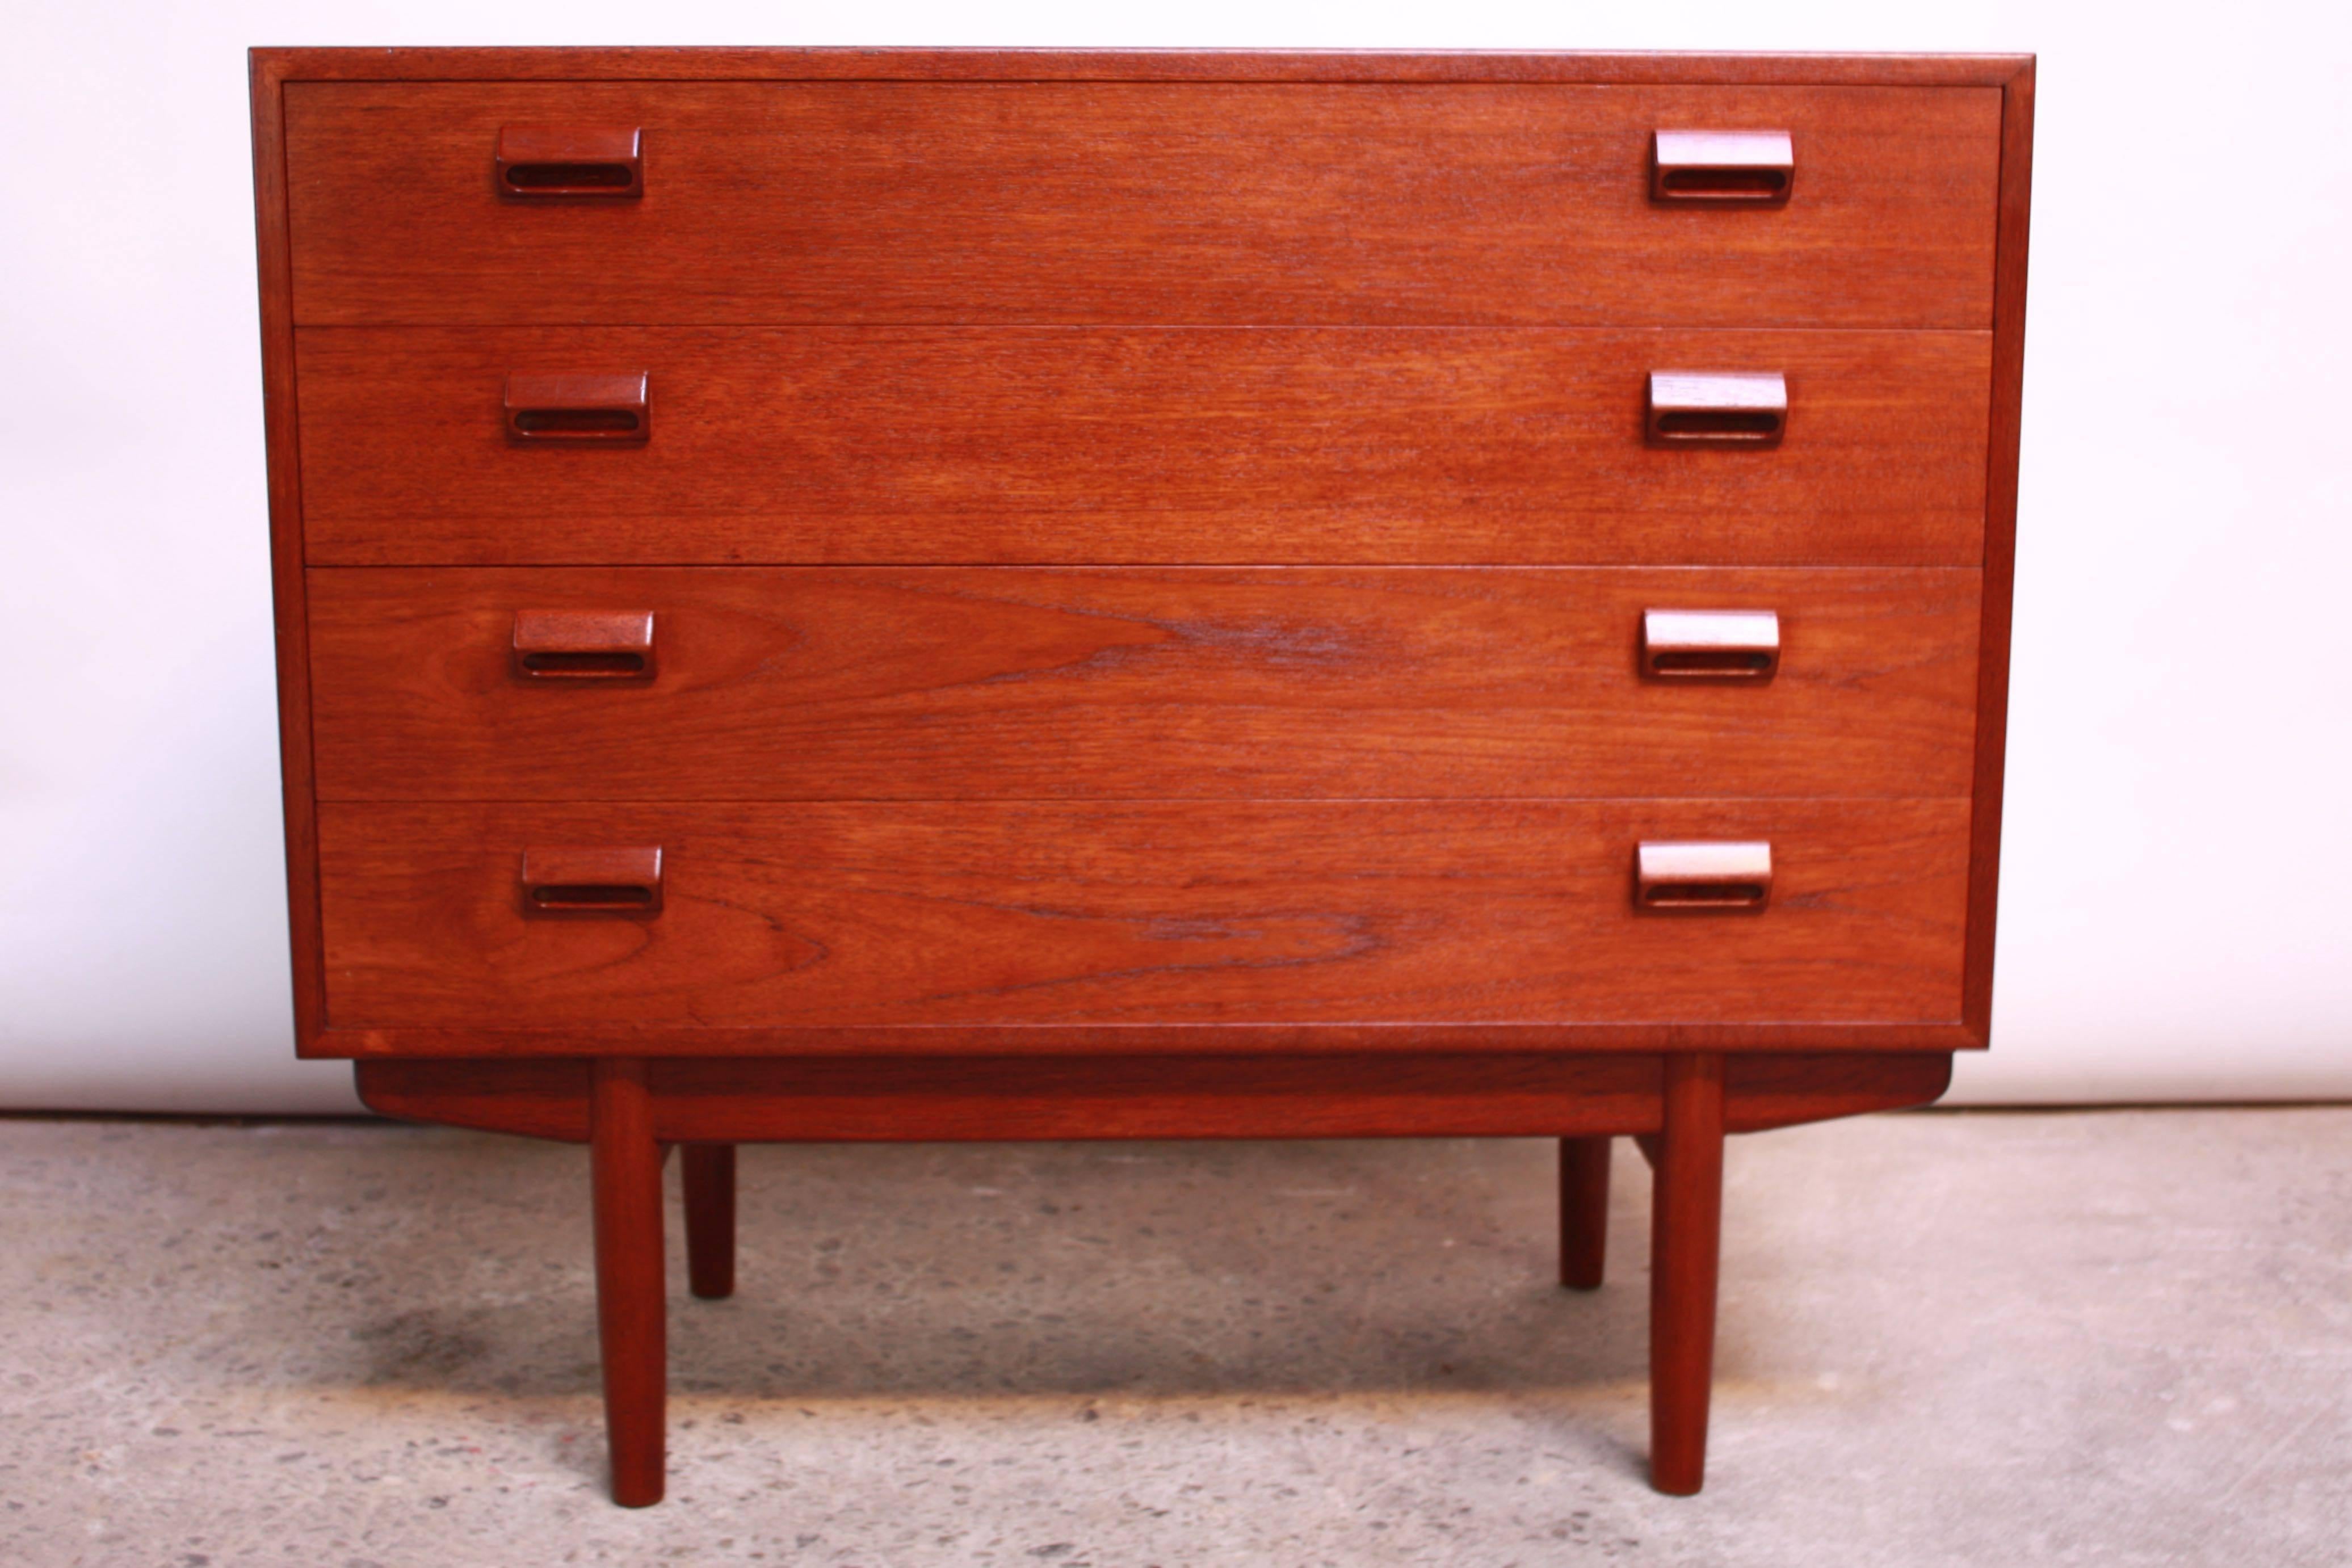 This teak chest was designed by Børge Mogensen for Soborg Mobler in the 1950s. It has four drawers with sculptural, block pulls and a sled base. 
We have a total of two available that can be sold together as a pair, if desired. The overall darker